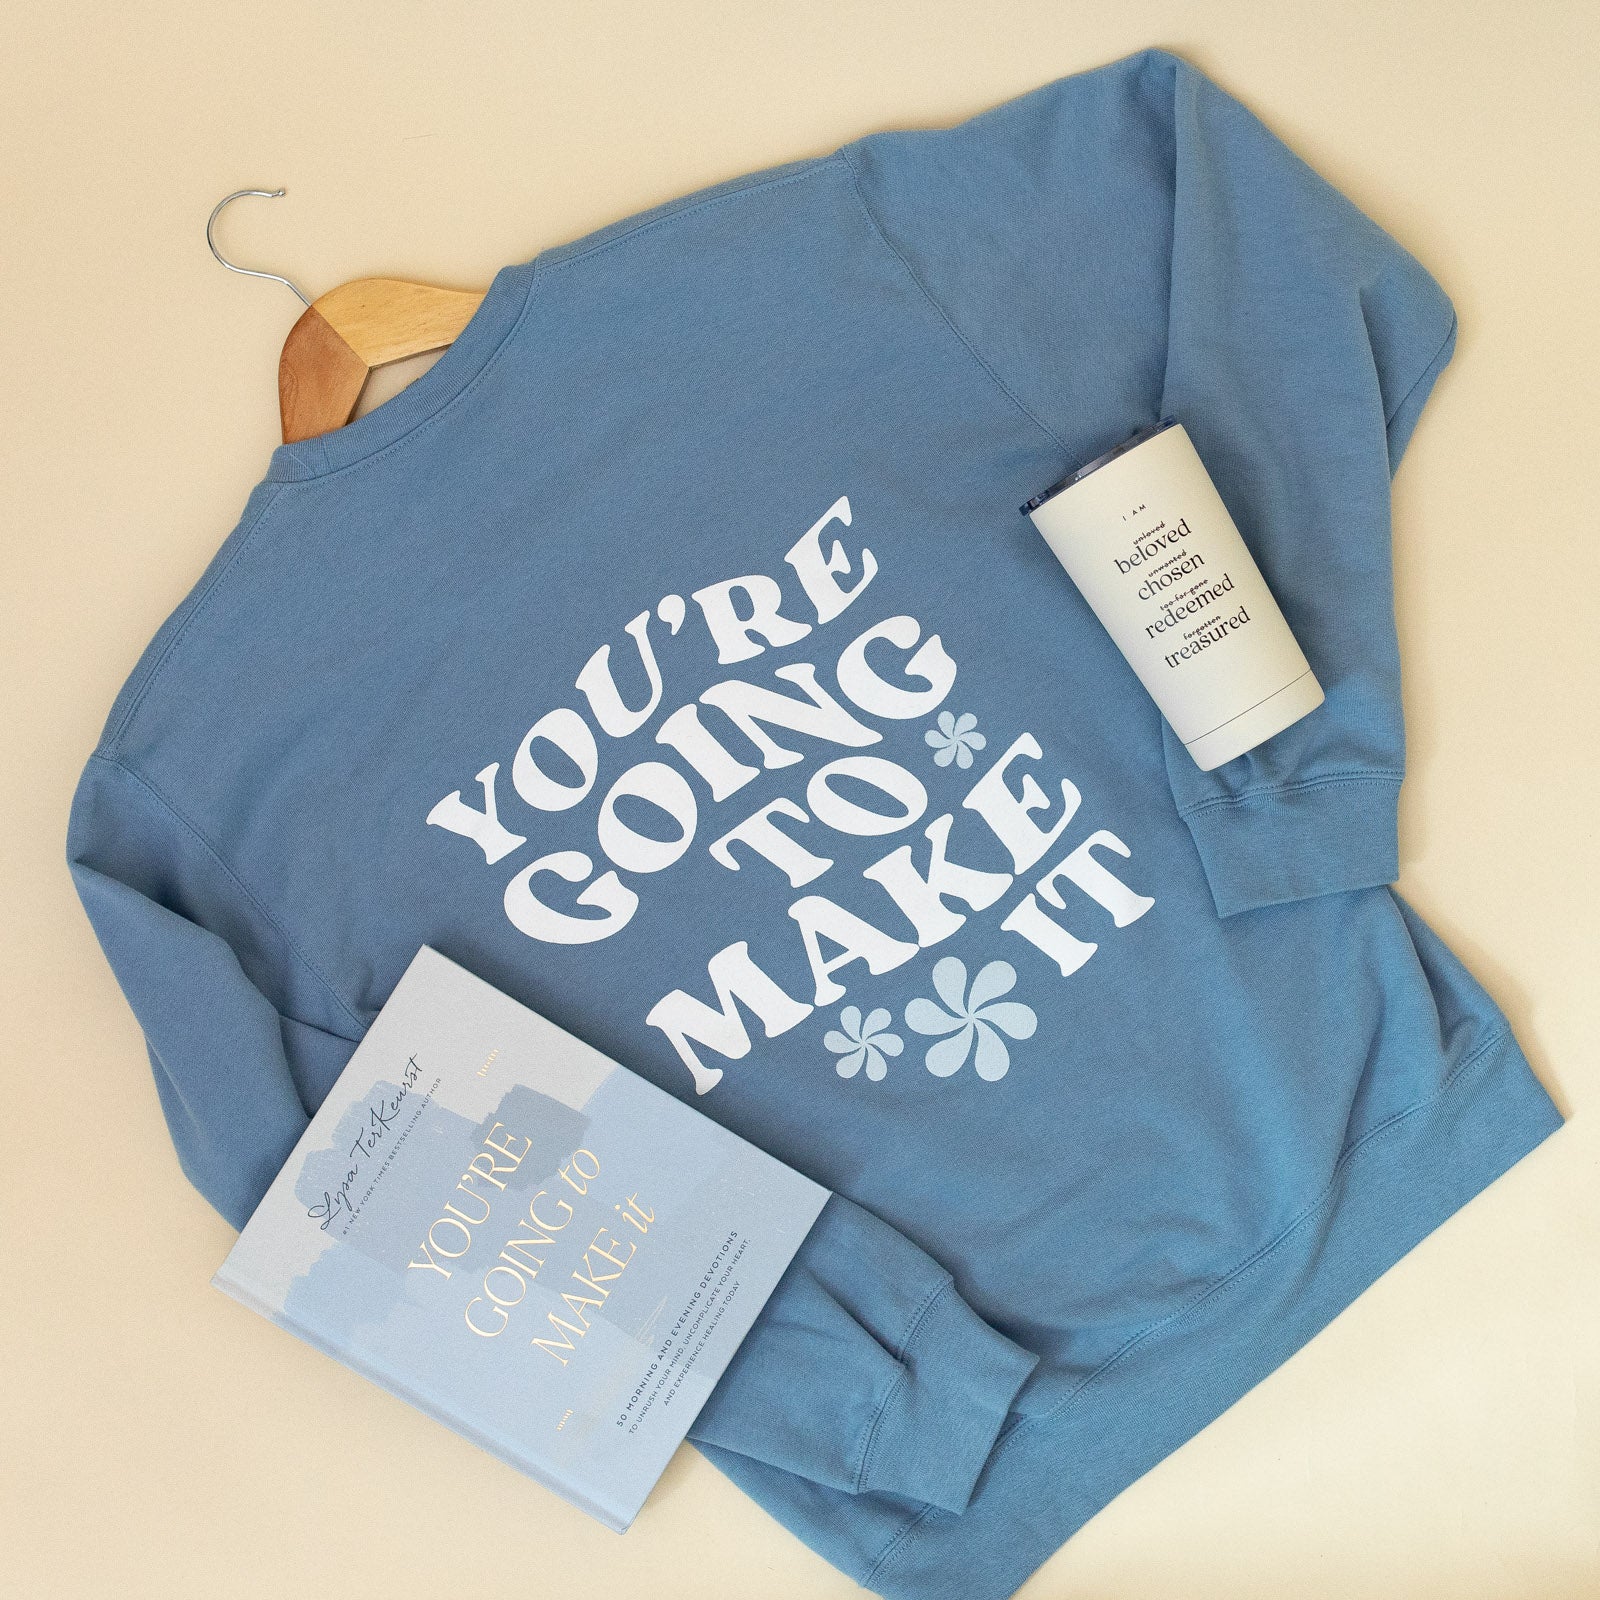 "You're Going to Make It" Bundle